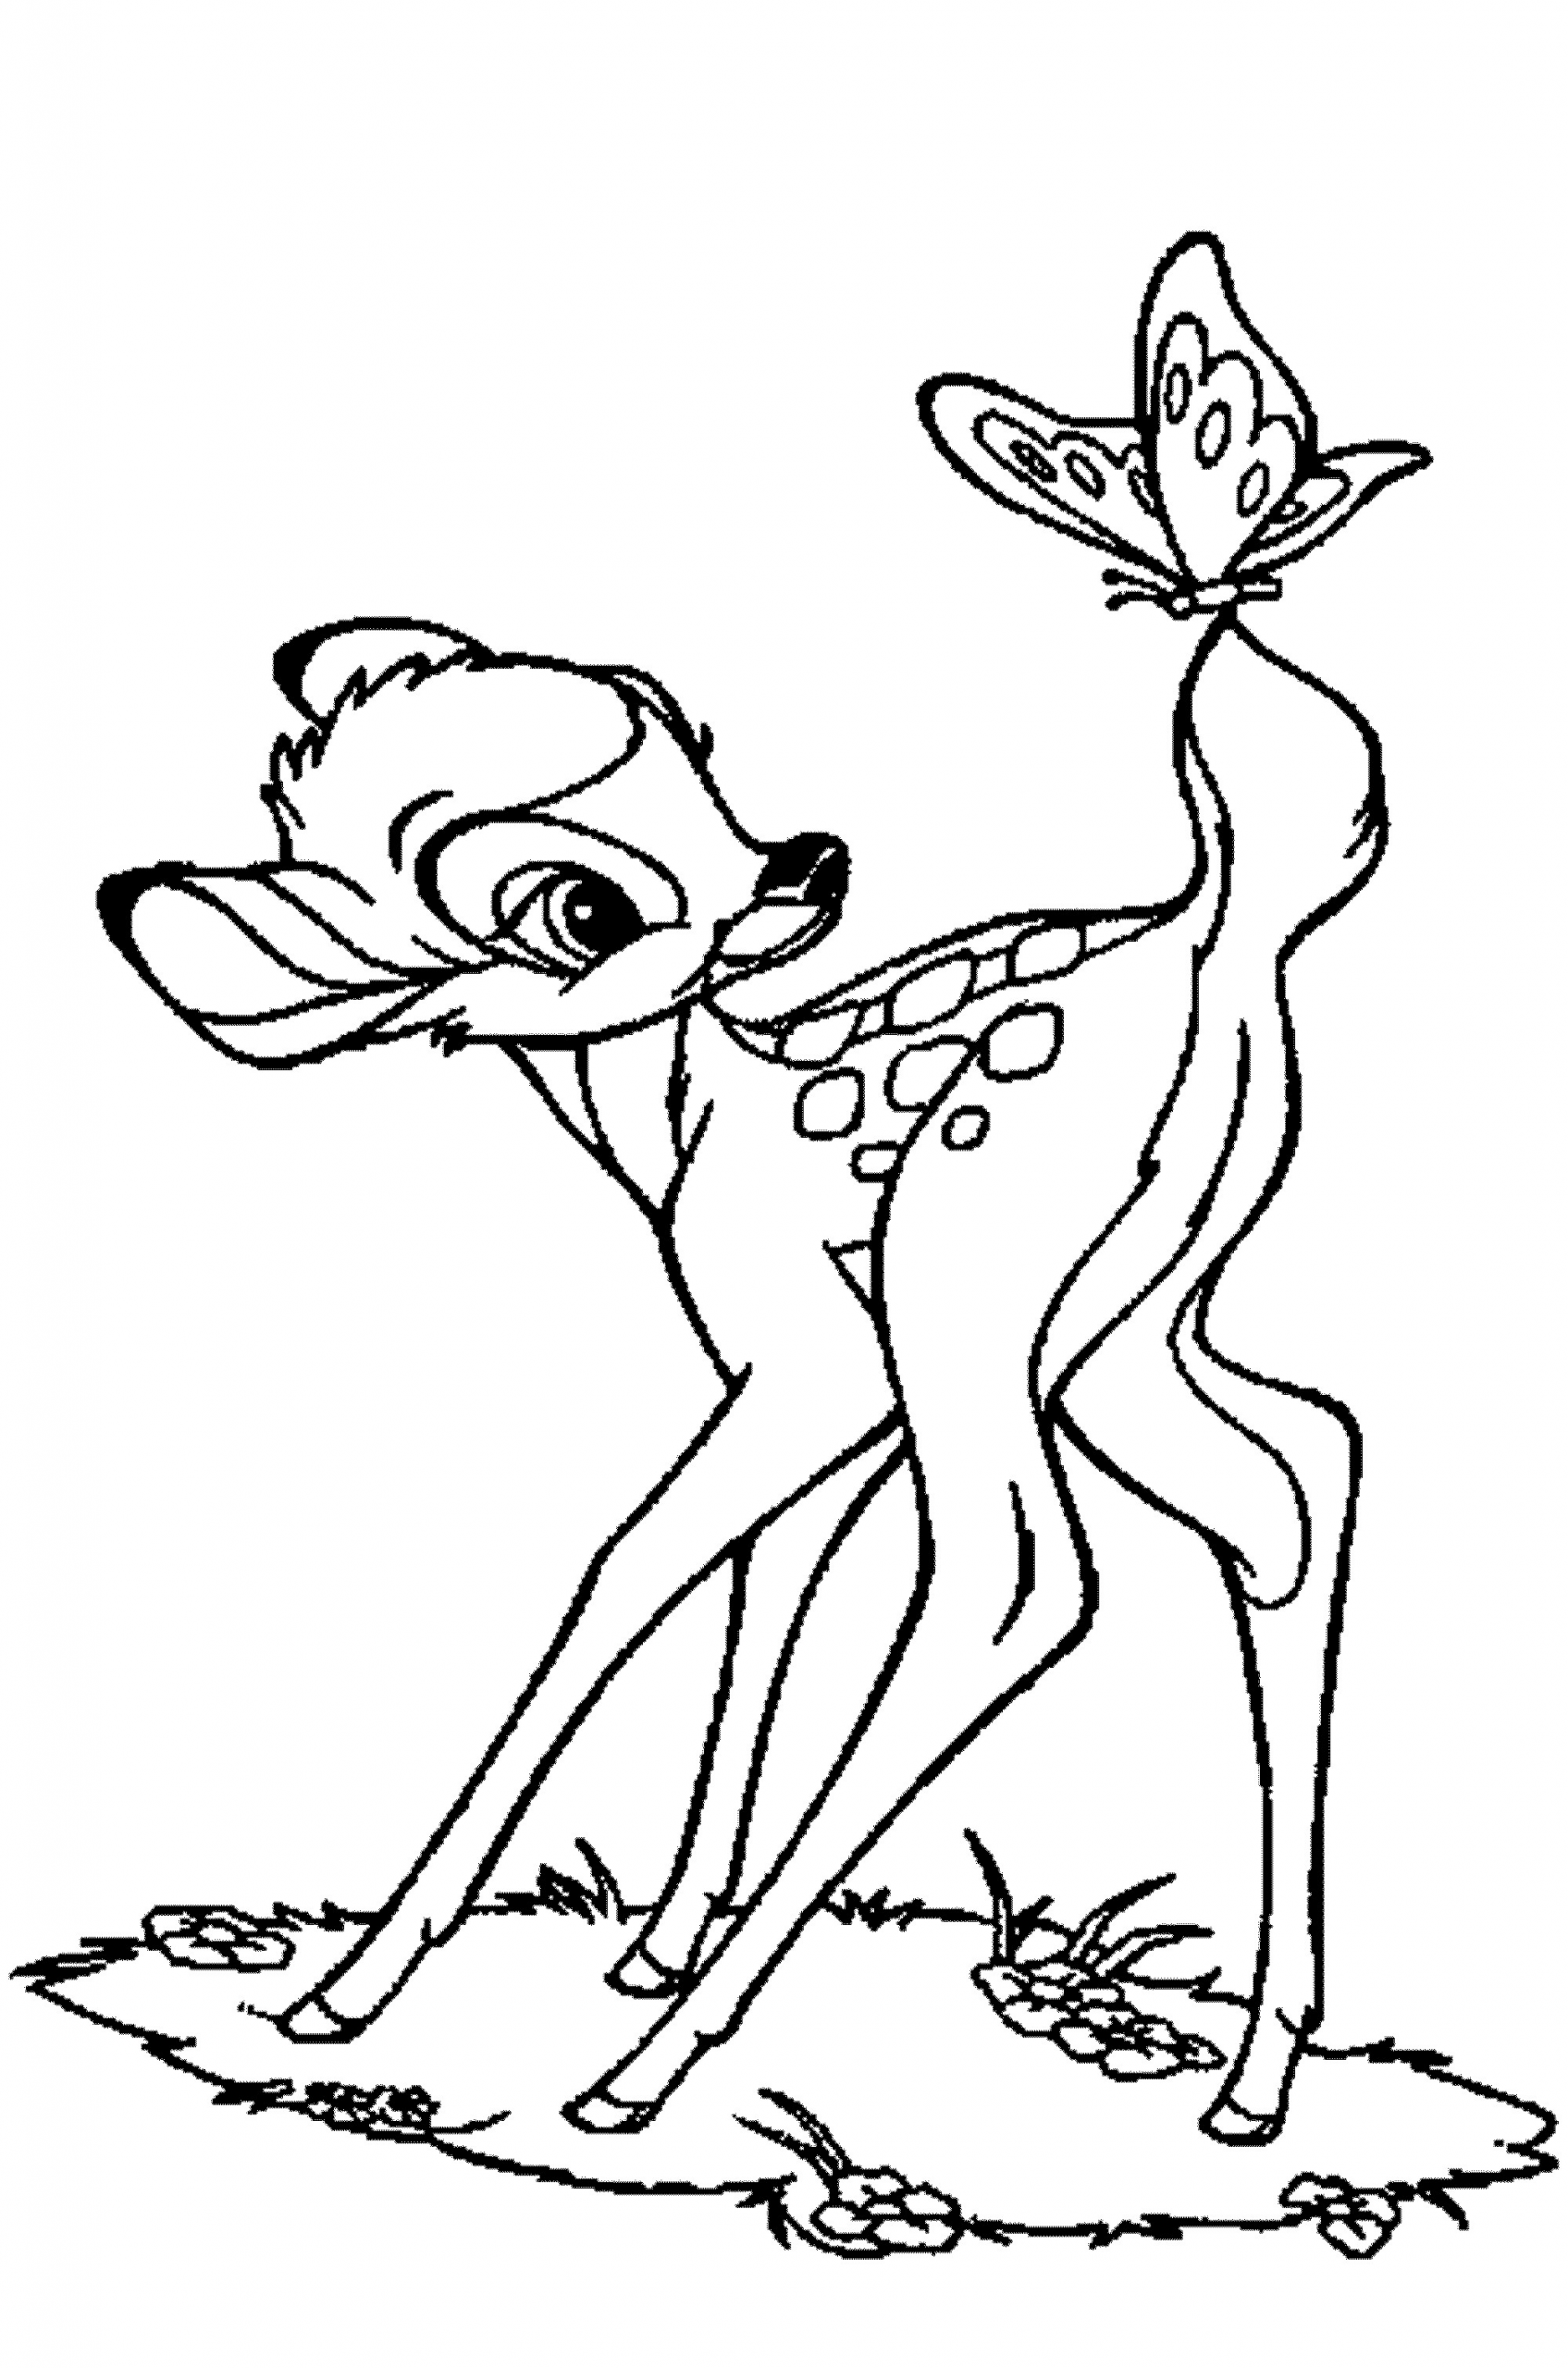 Baby Deer Coloring Page
 baby deer coloring pages Printable Kids Colouring Pages